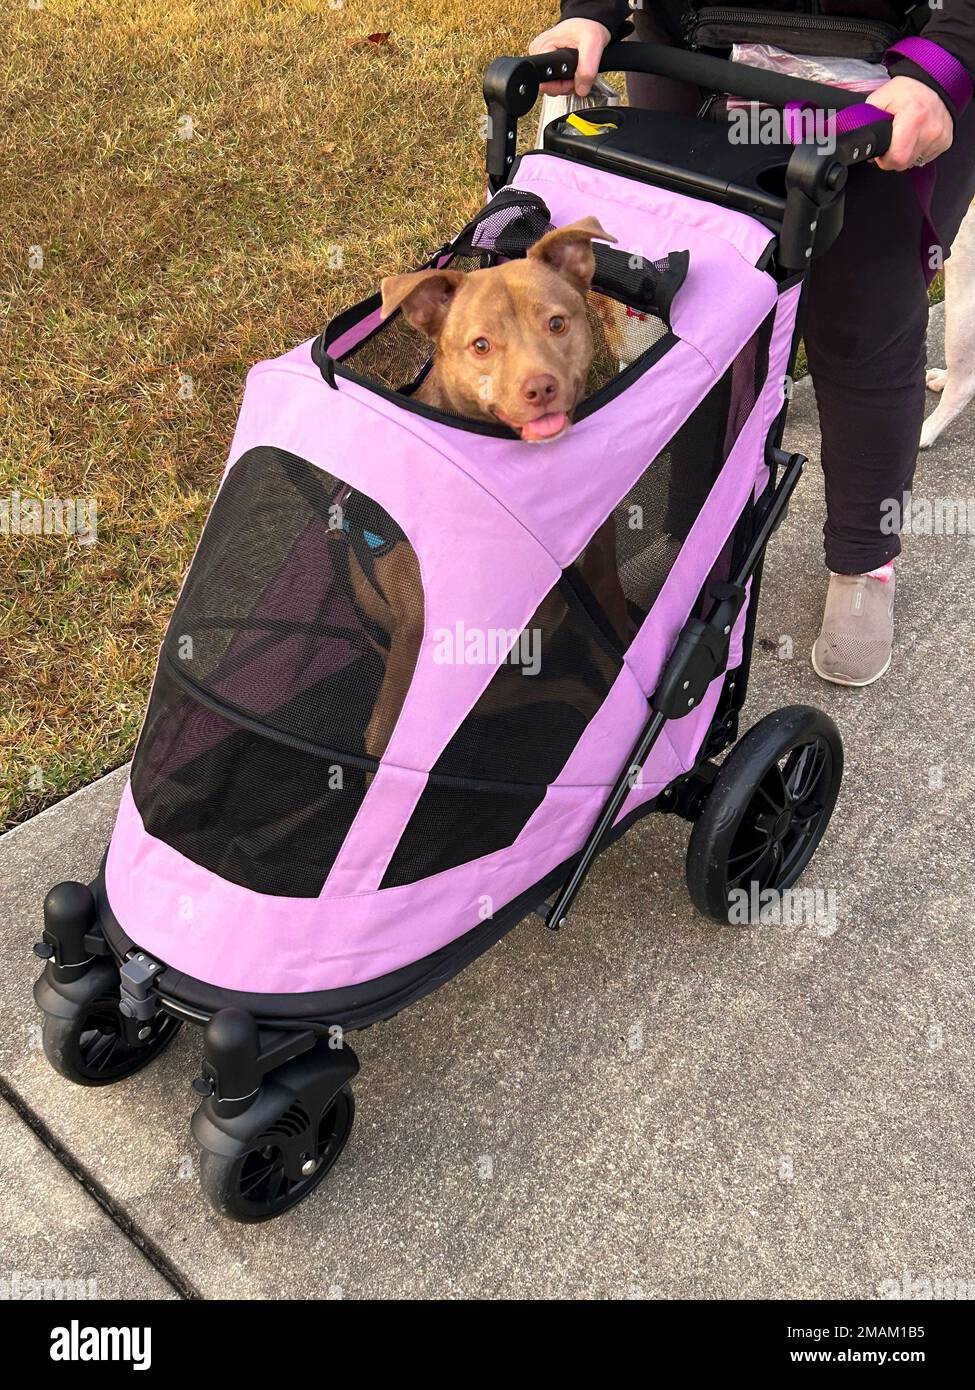 A cute disabled, handicapped dog in a pet stroller Stock Photo